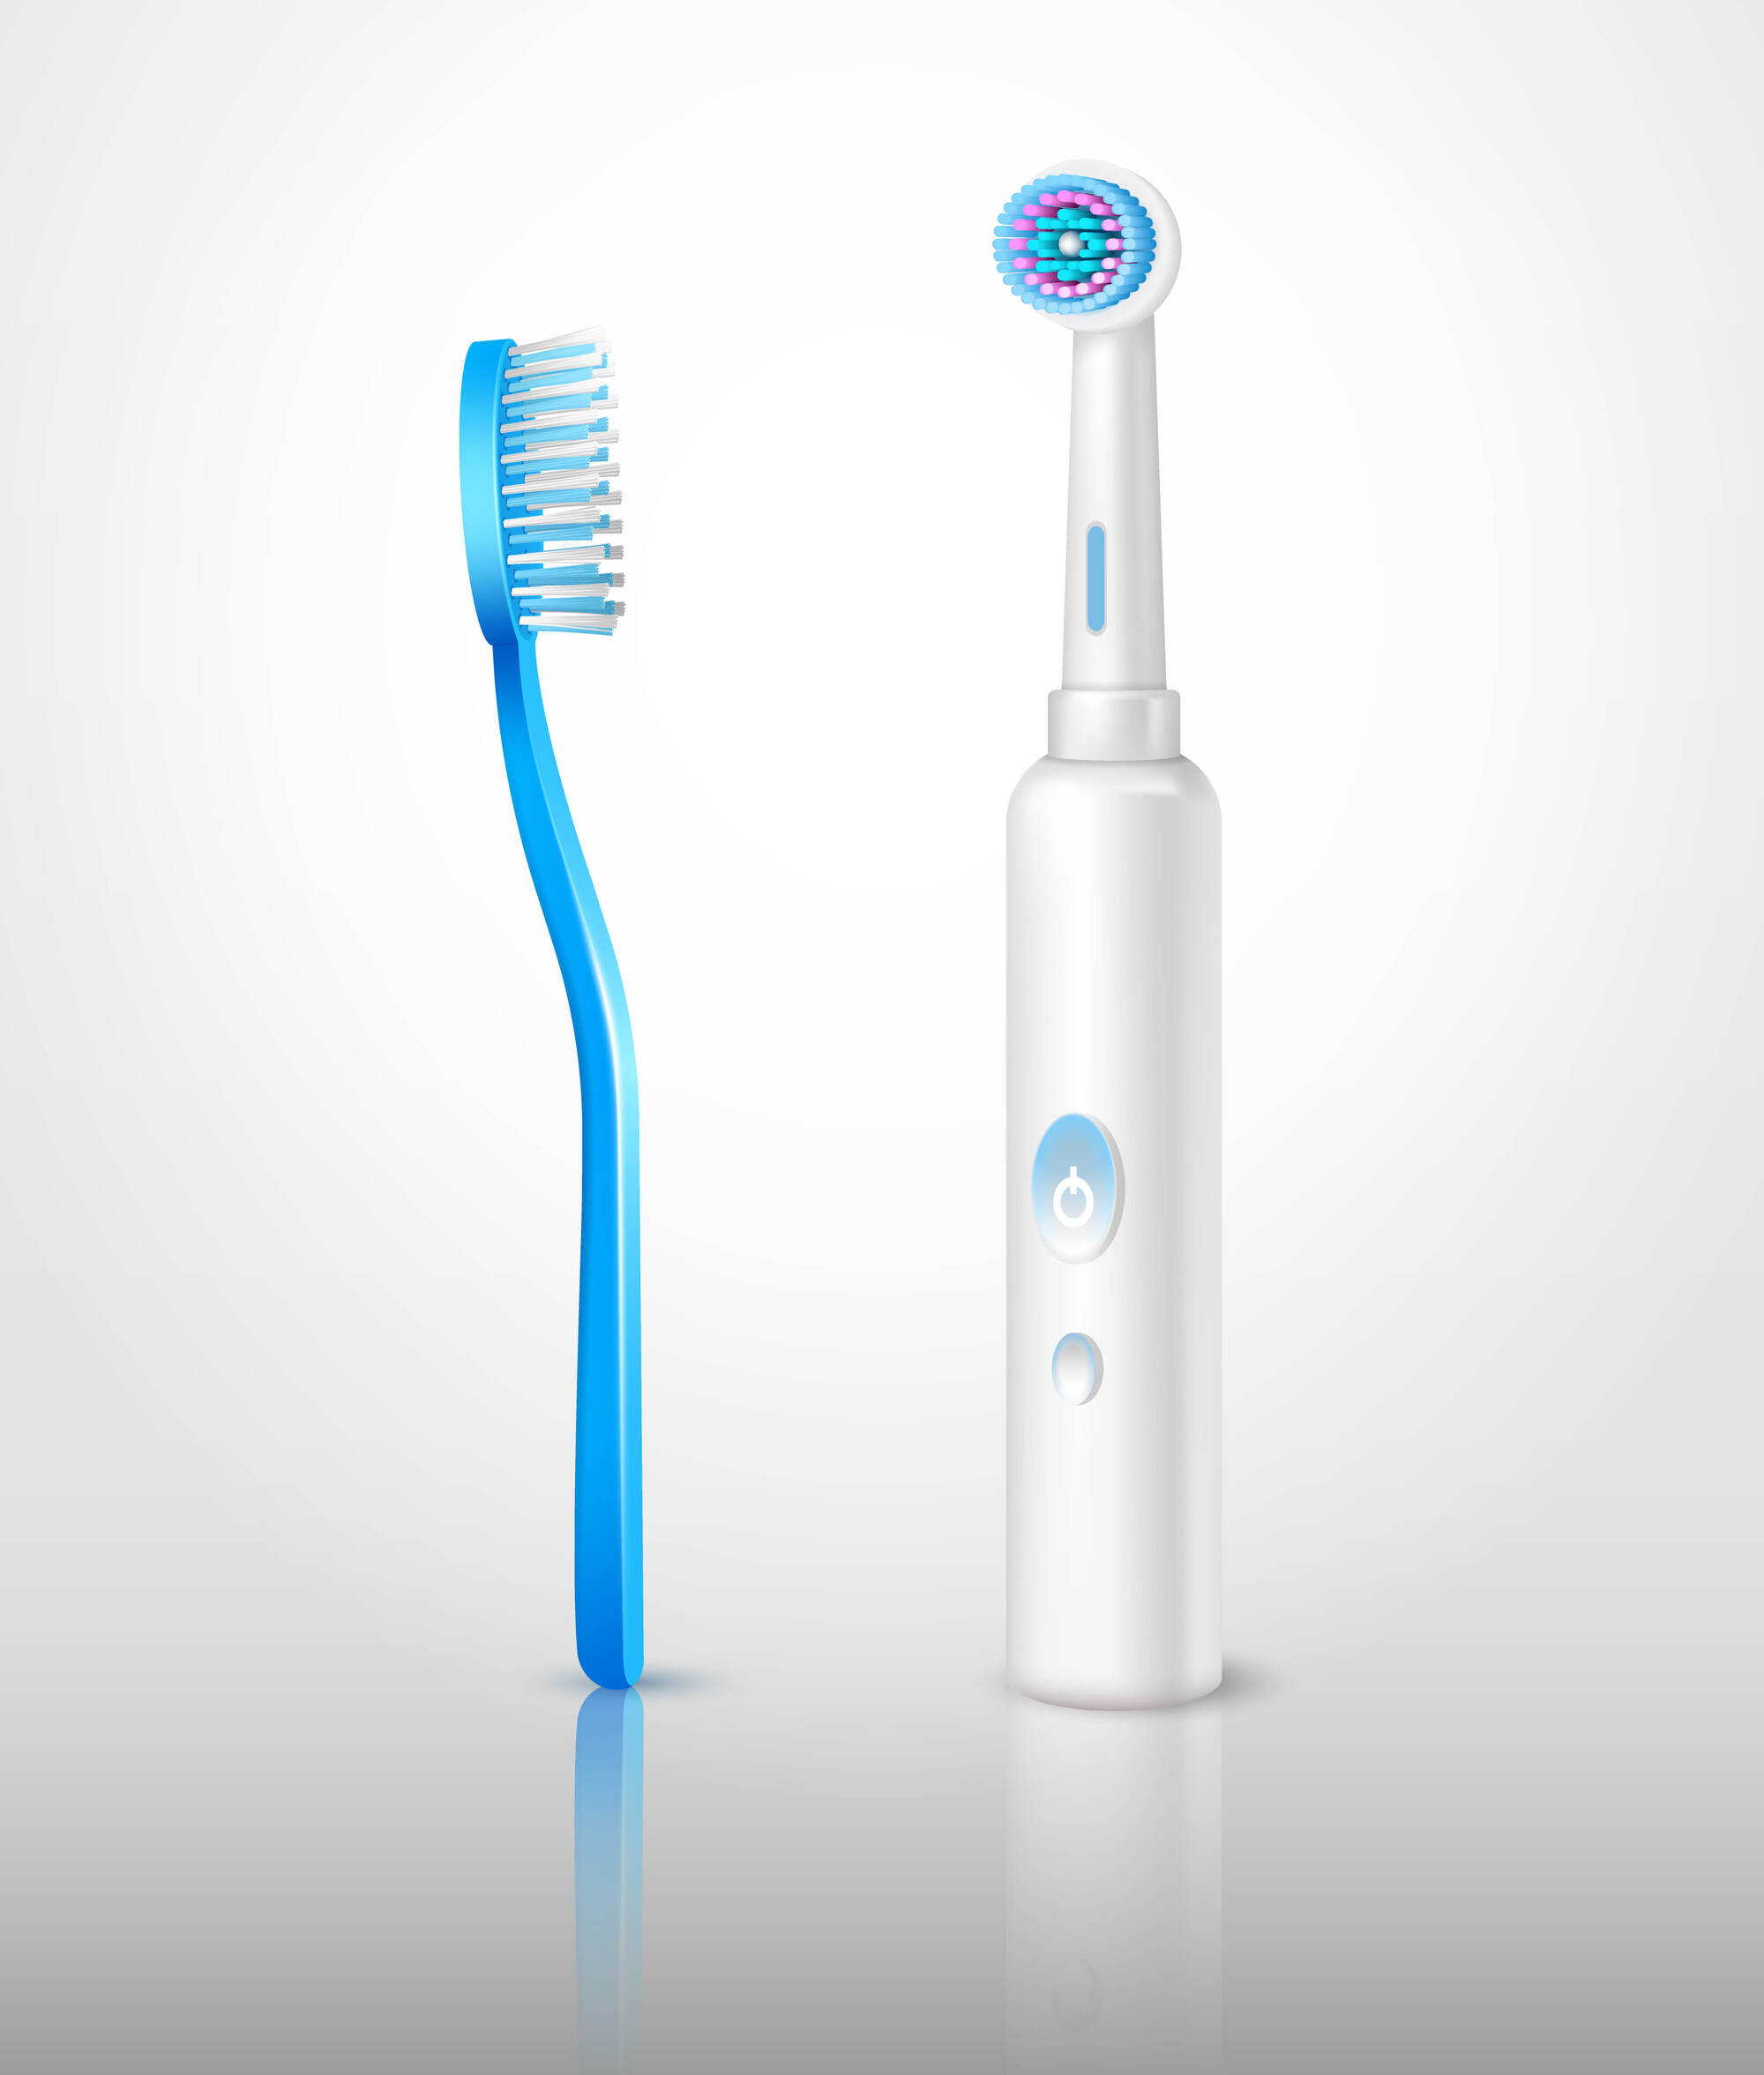 Two toothbrushes - one electric and one manual